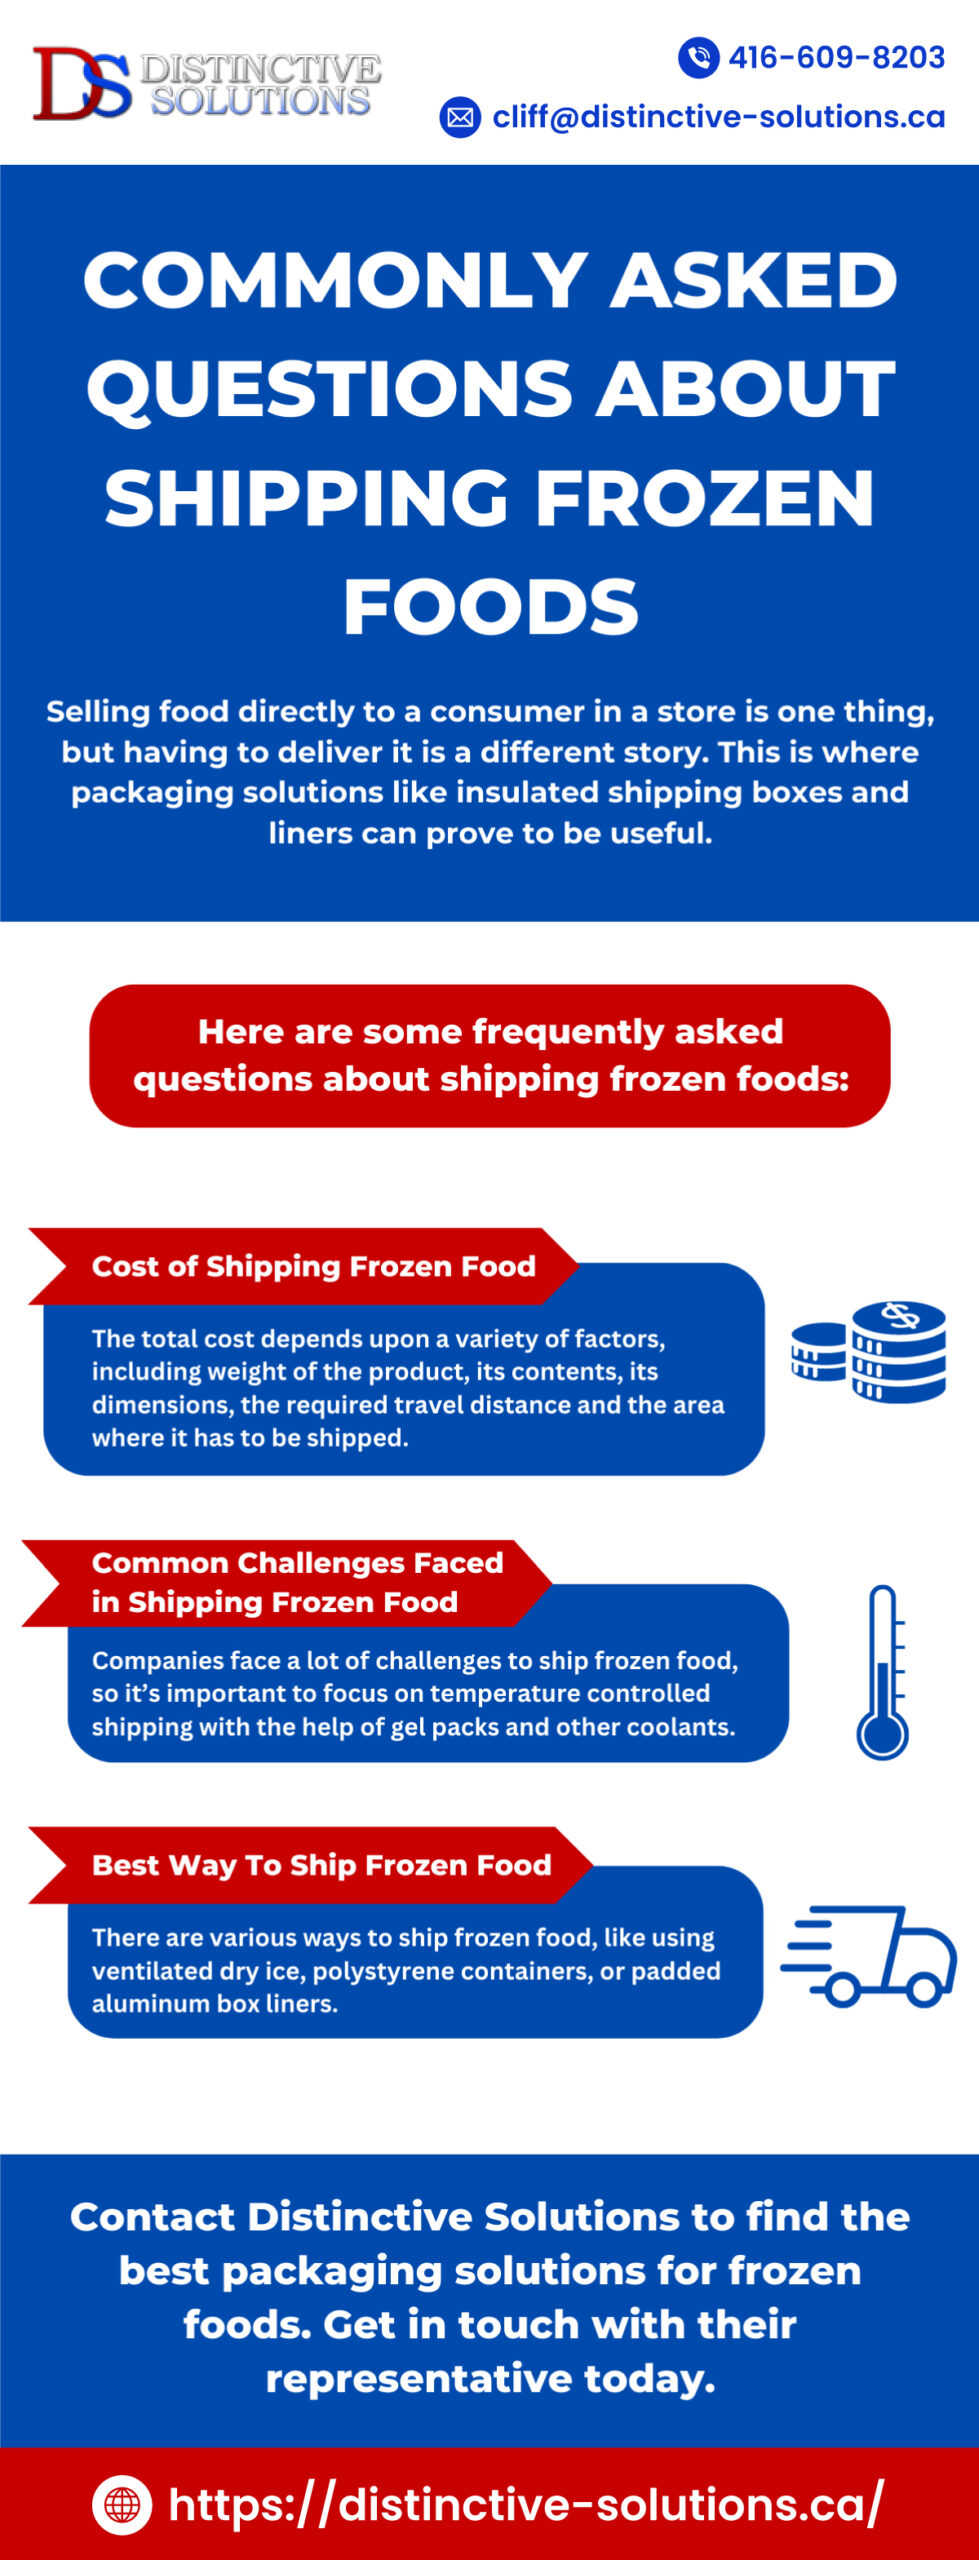 Shipping Frozen Foods